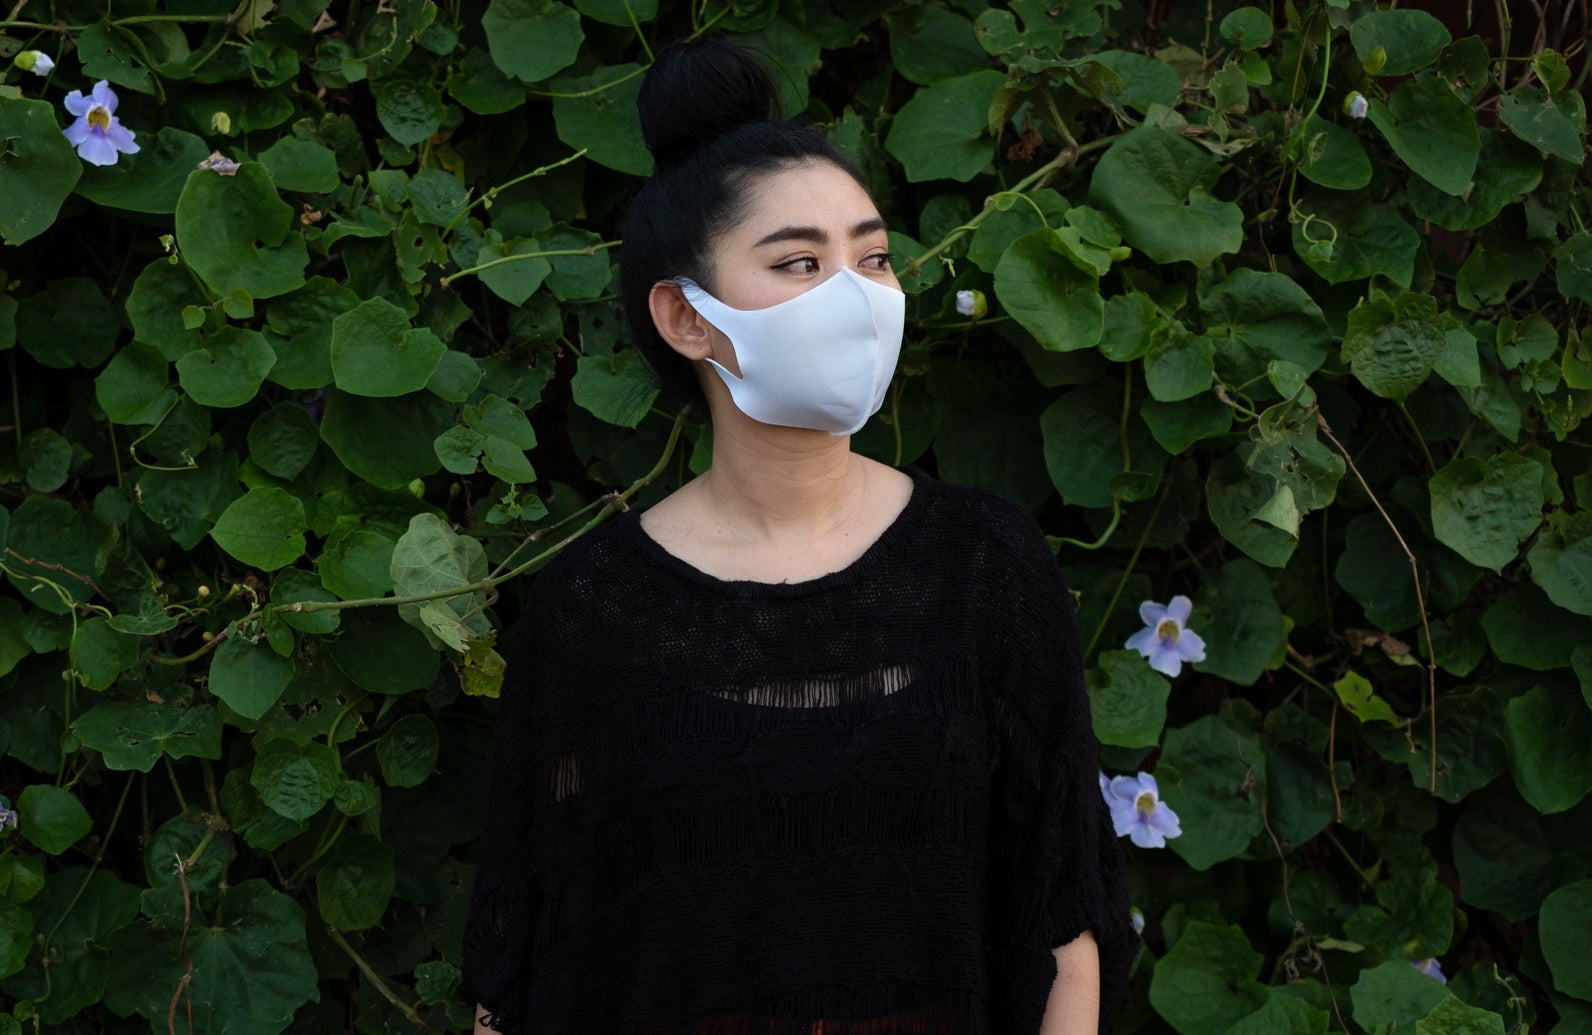 A person wearing a mask against a leafy backdrop.